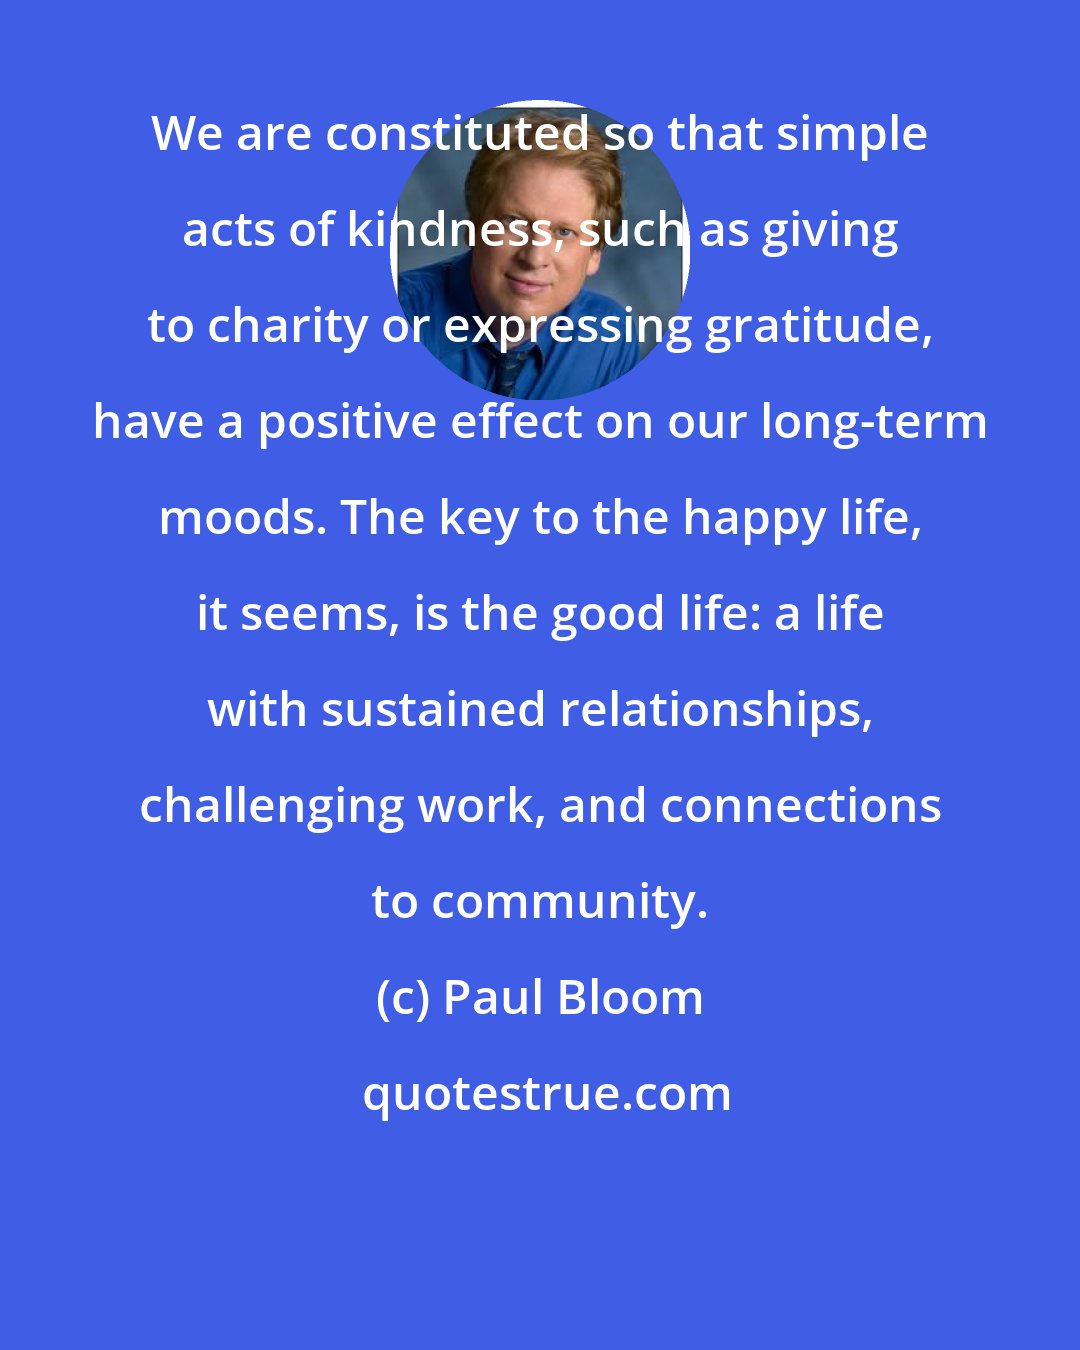 Paul Bloom: We are constituted so that simple acts of kindness, such as giving to charity or expressing gratitude, have a positive effect on our long-term moods. The key to the happy life, it seems, is the good life: a life with sustained relationships, challenging work, and connections to community.